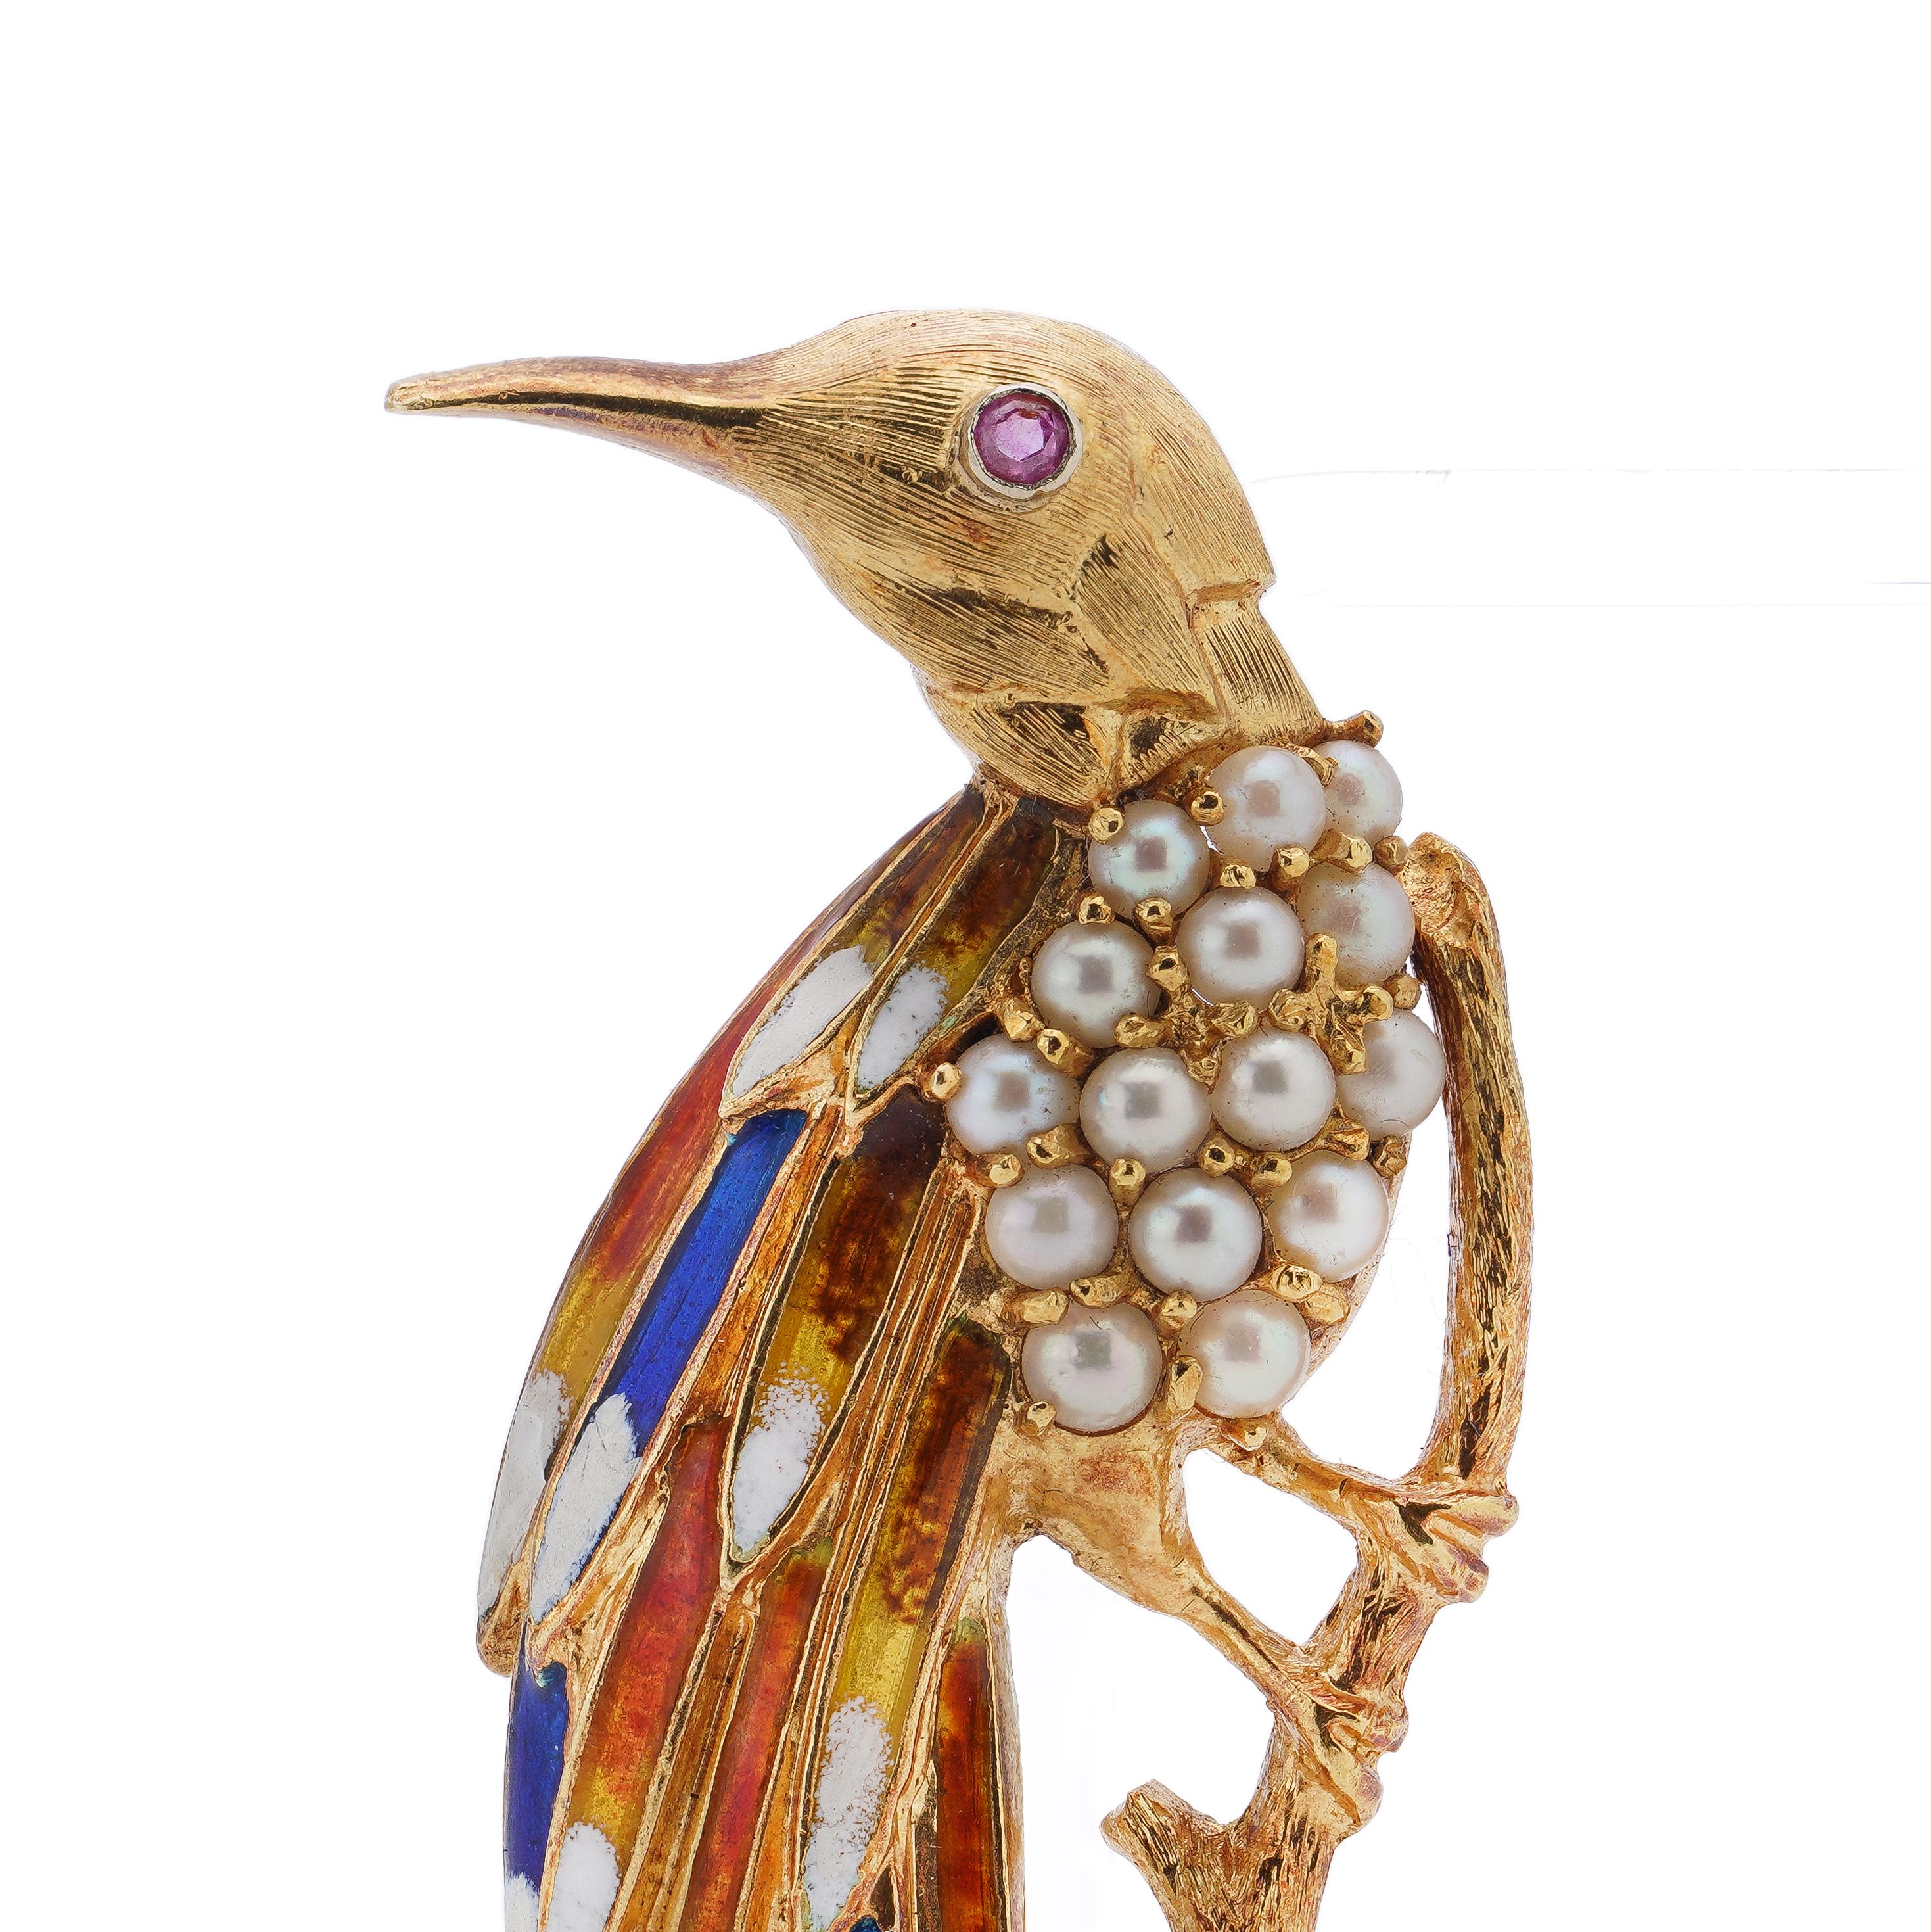 Mid-20th century 18kt gold bird brooch on a branch with colourful feathers For Sale 1